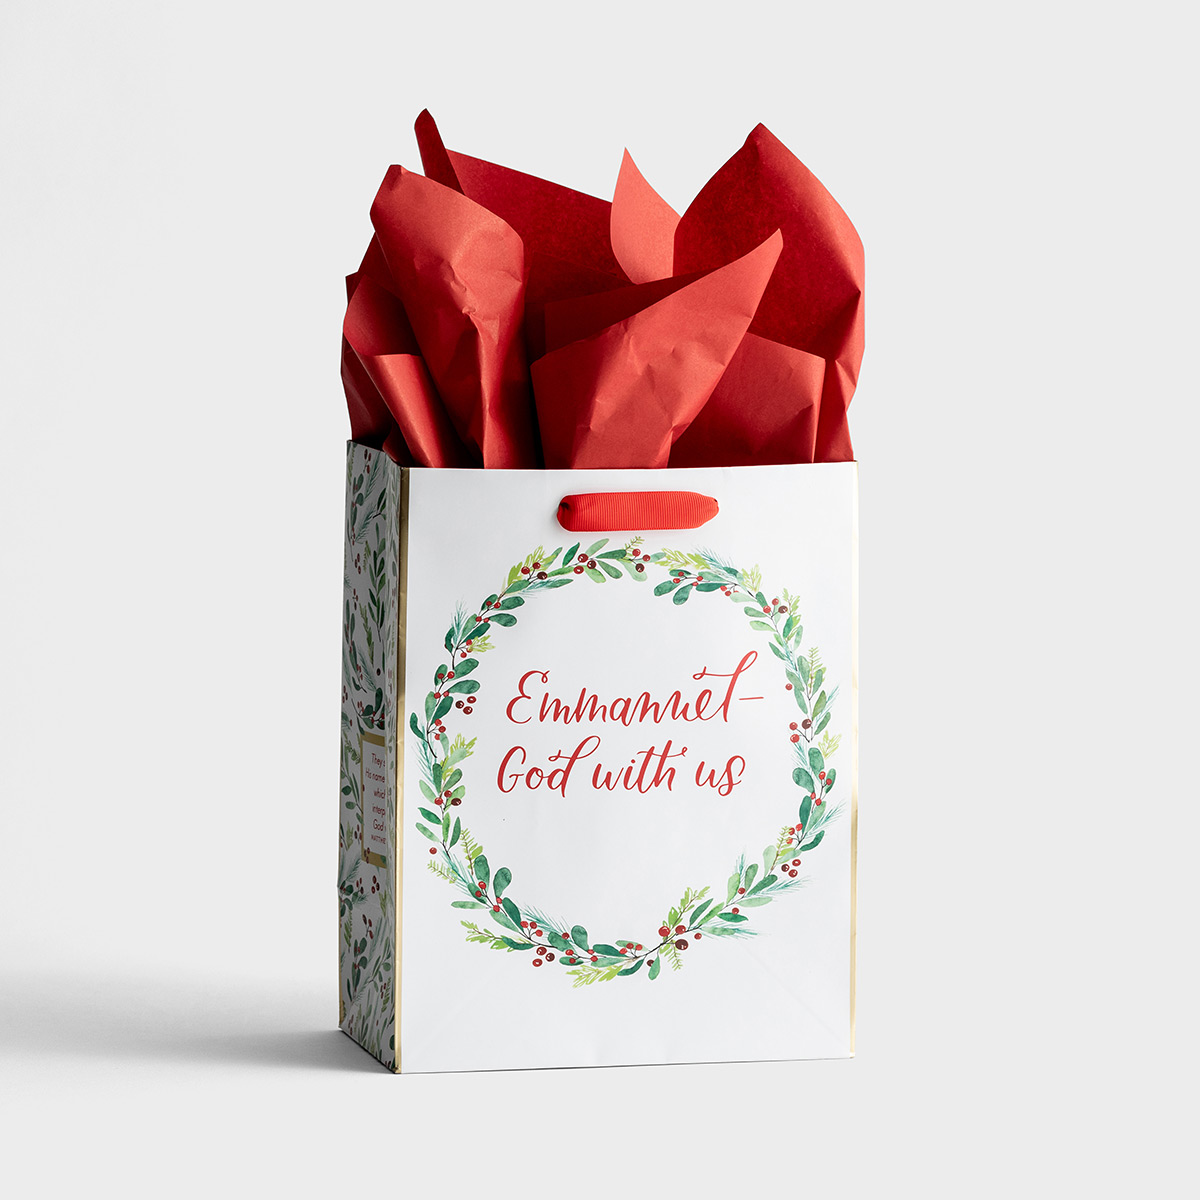 Emmanuel, God With Us - Medium Christmas Gift Bag with Tissue Paper